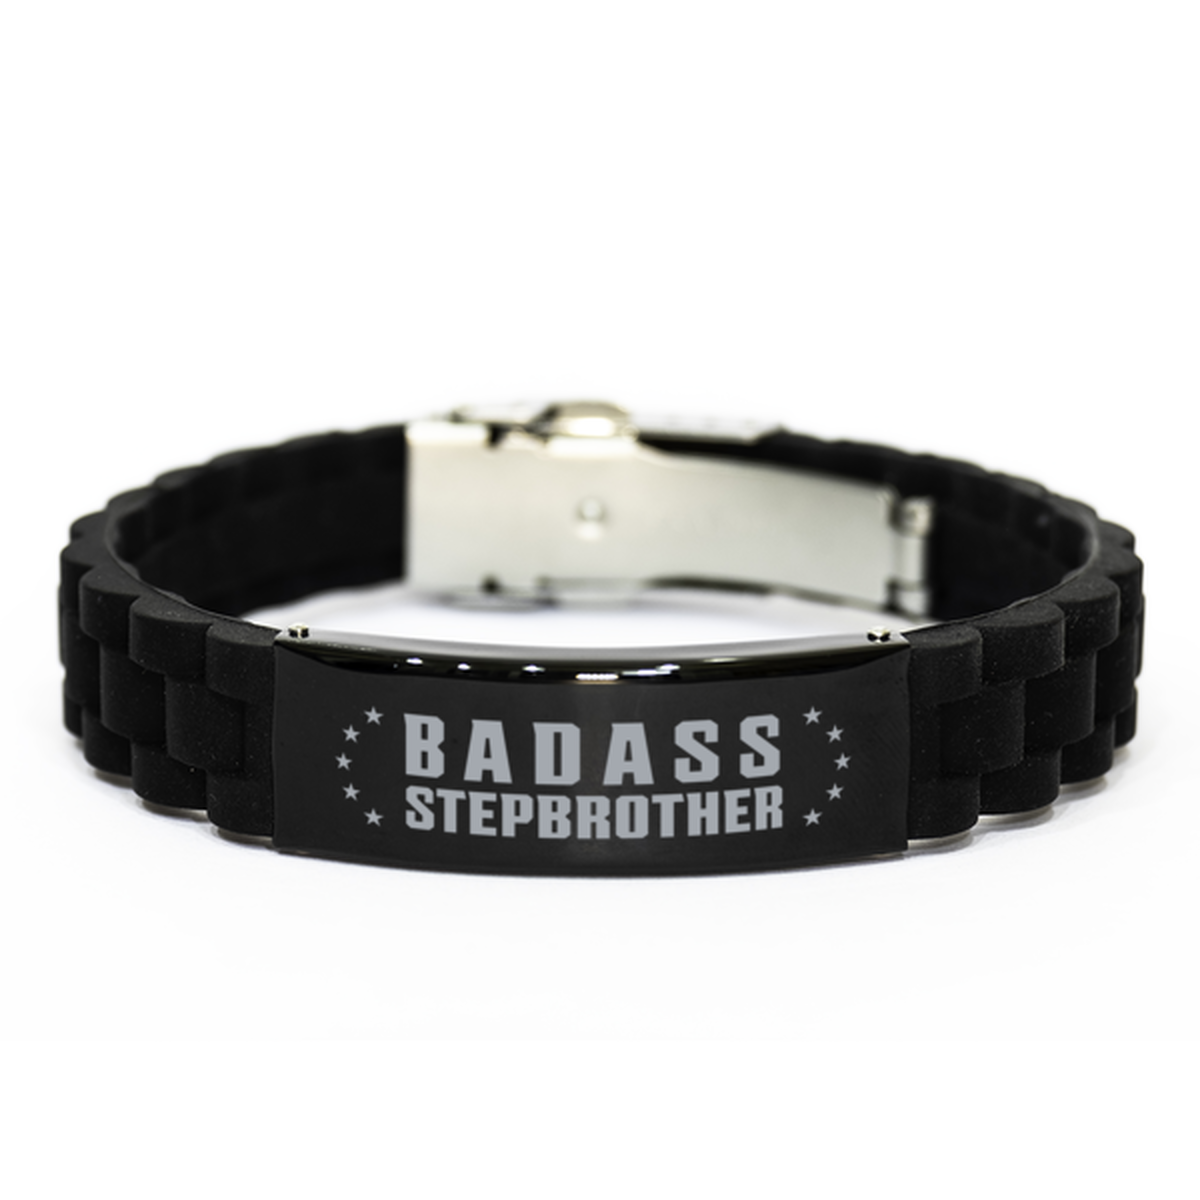 Stepbrother Black Bracelet, Badass Stepbrother, Funny Family Gifts For Stepbrother From Brother Sister